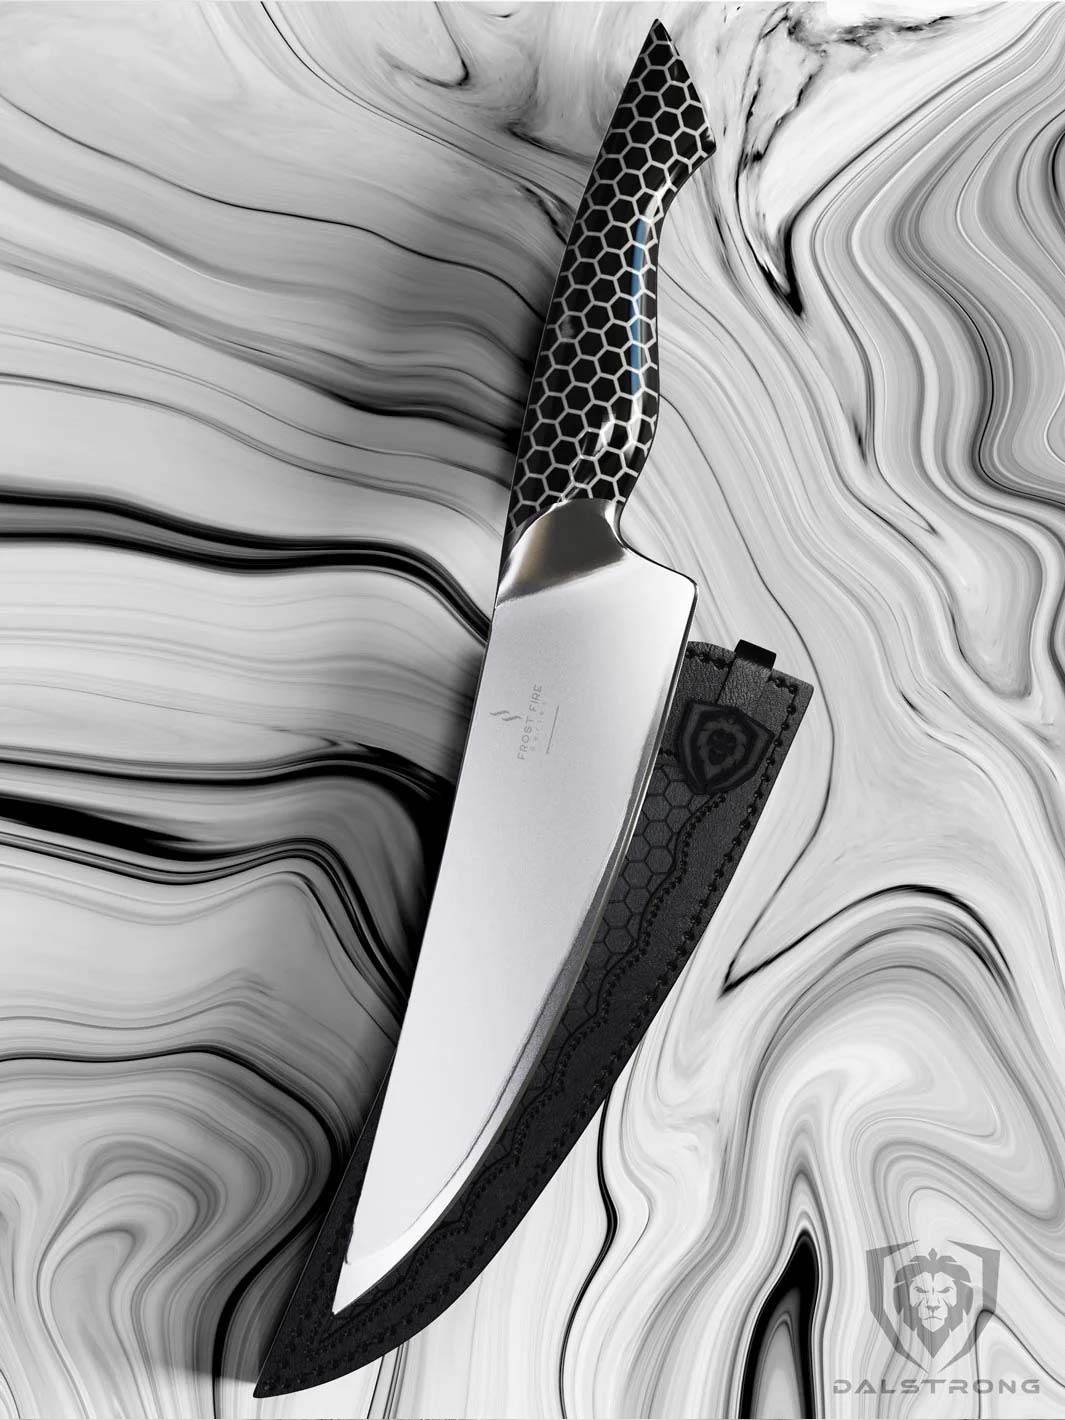 Dalstrong frost fire series 8 inch chef knife with dark ice handle with it's black sheath.